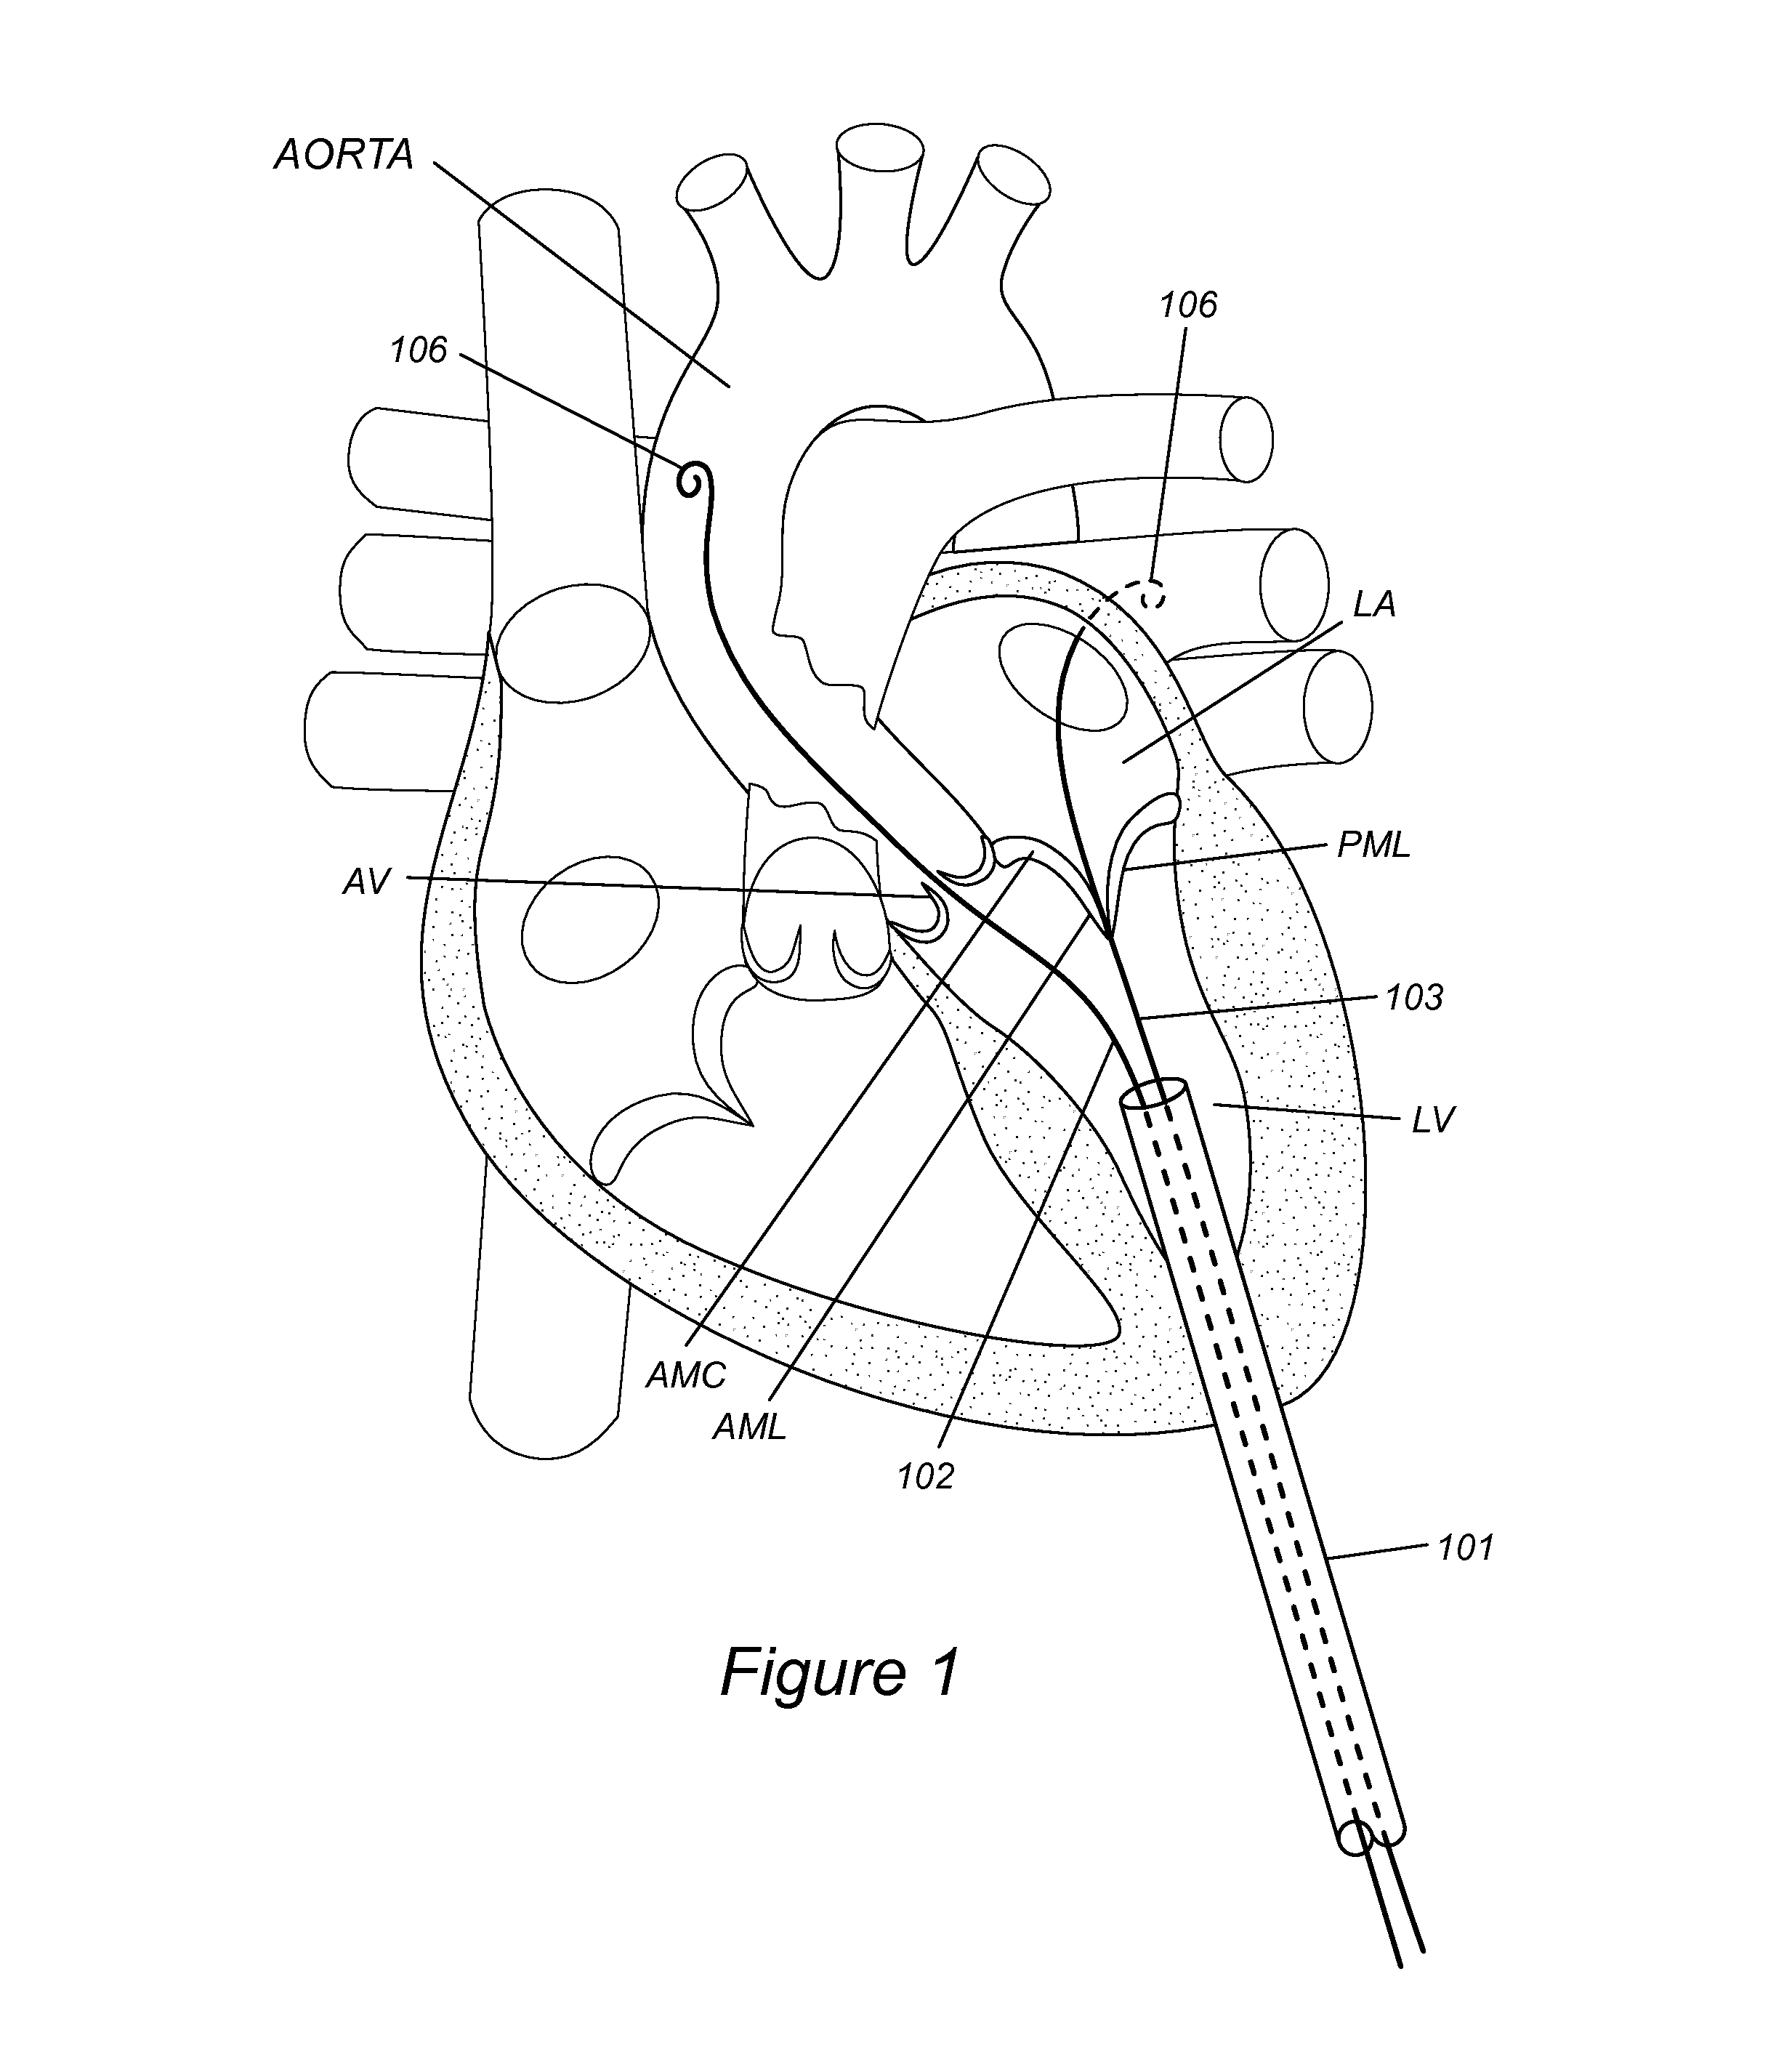 Anatomically-orientated and self-positioning transcatheter mitral valve